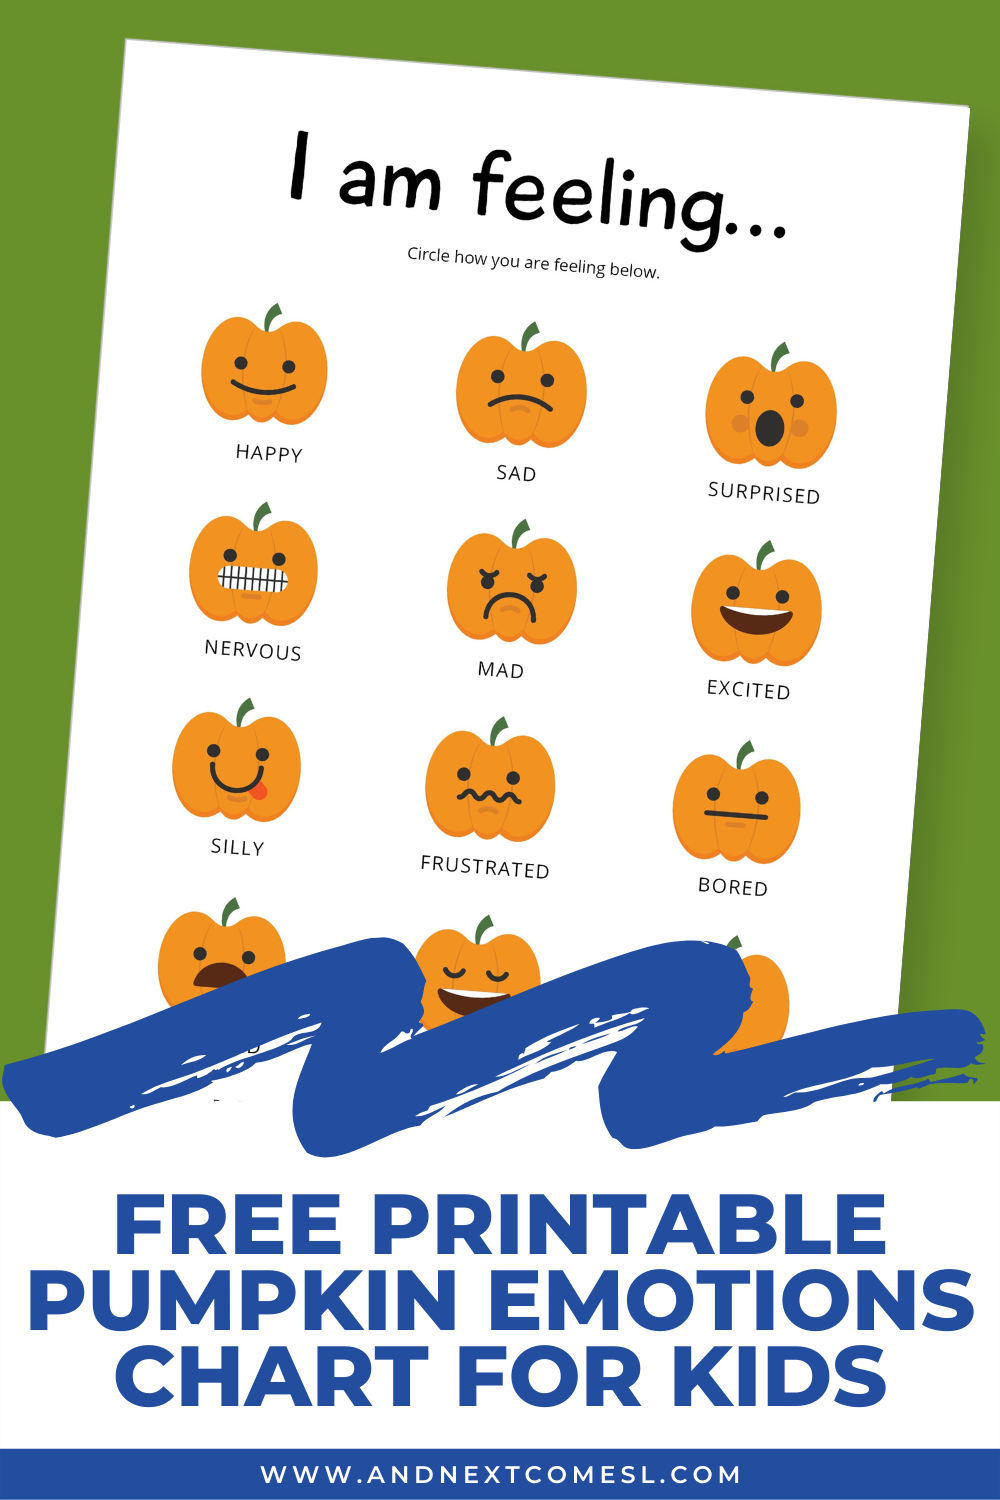 Free printable pumpkin emotions chart for kids - perfect for Halloween!